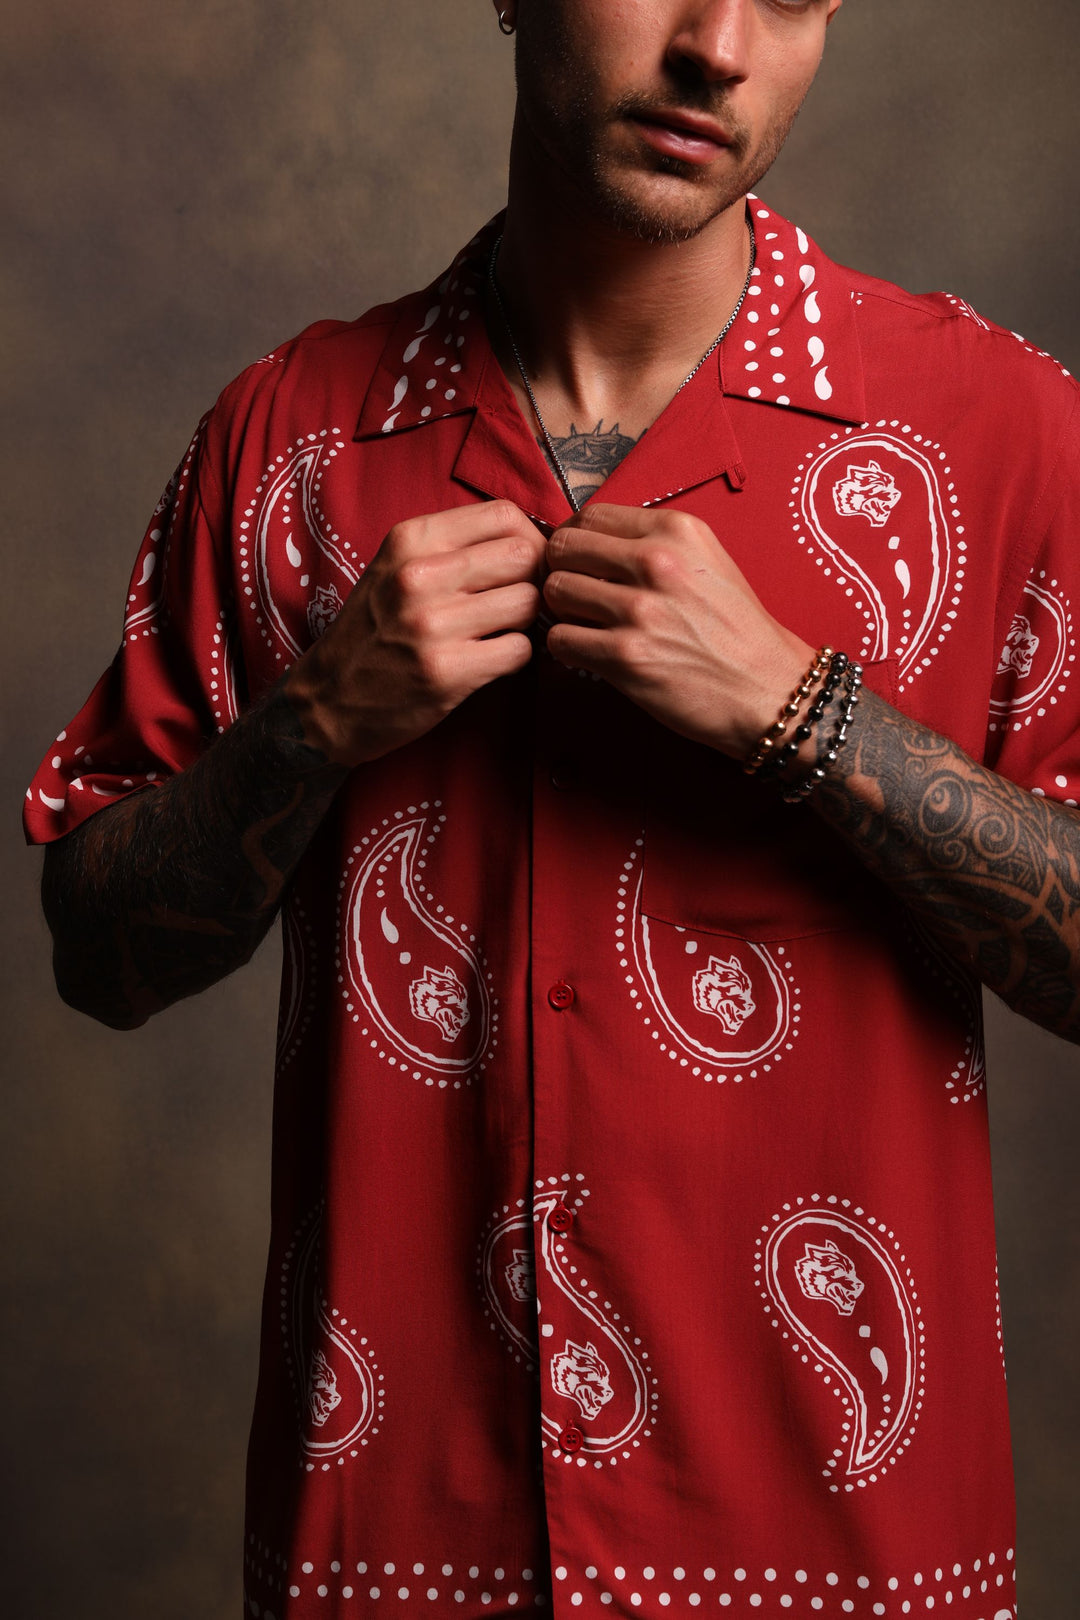 Southwest Paisley Ace Button Up Shirt in Western Red